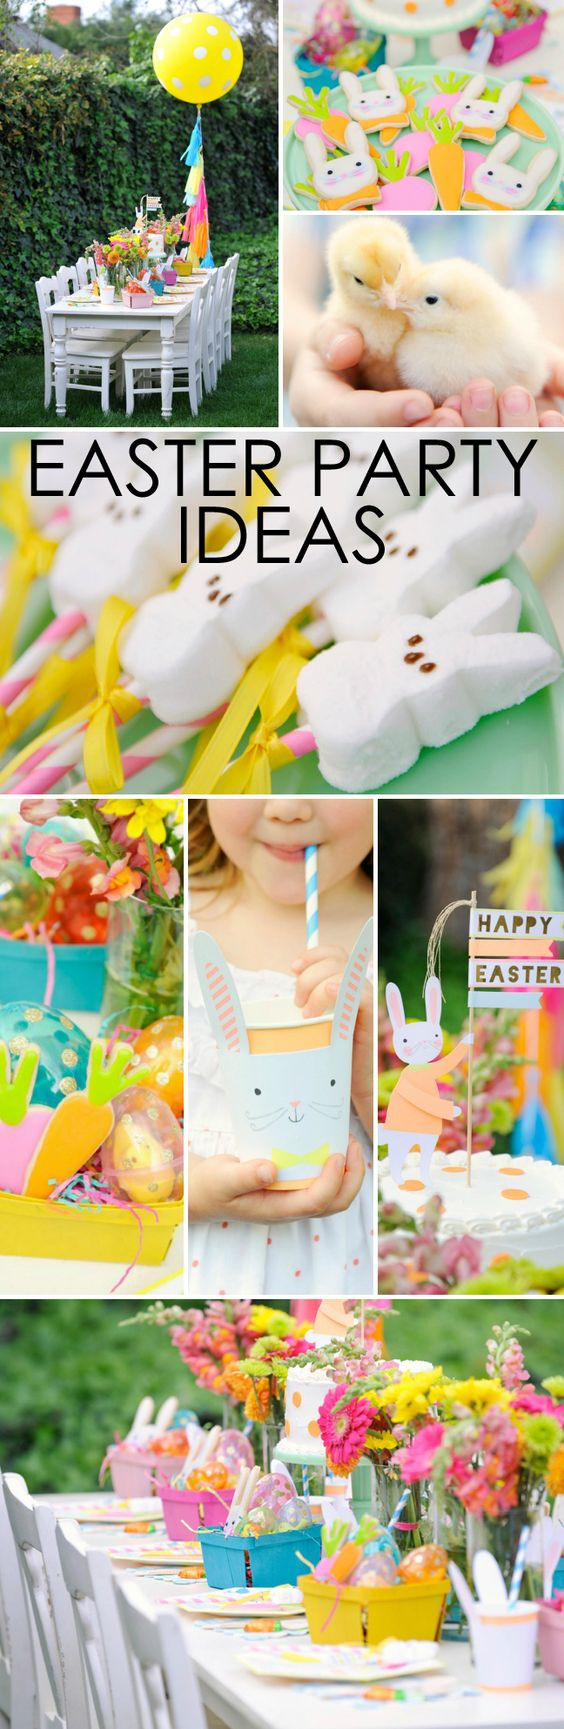 Kids Easter Birthday Party Ideas
 Plan a Bunny tastic Kids Easter Party